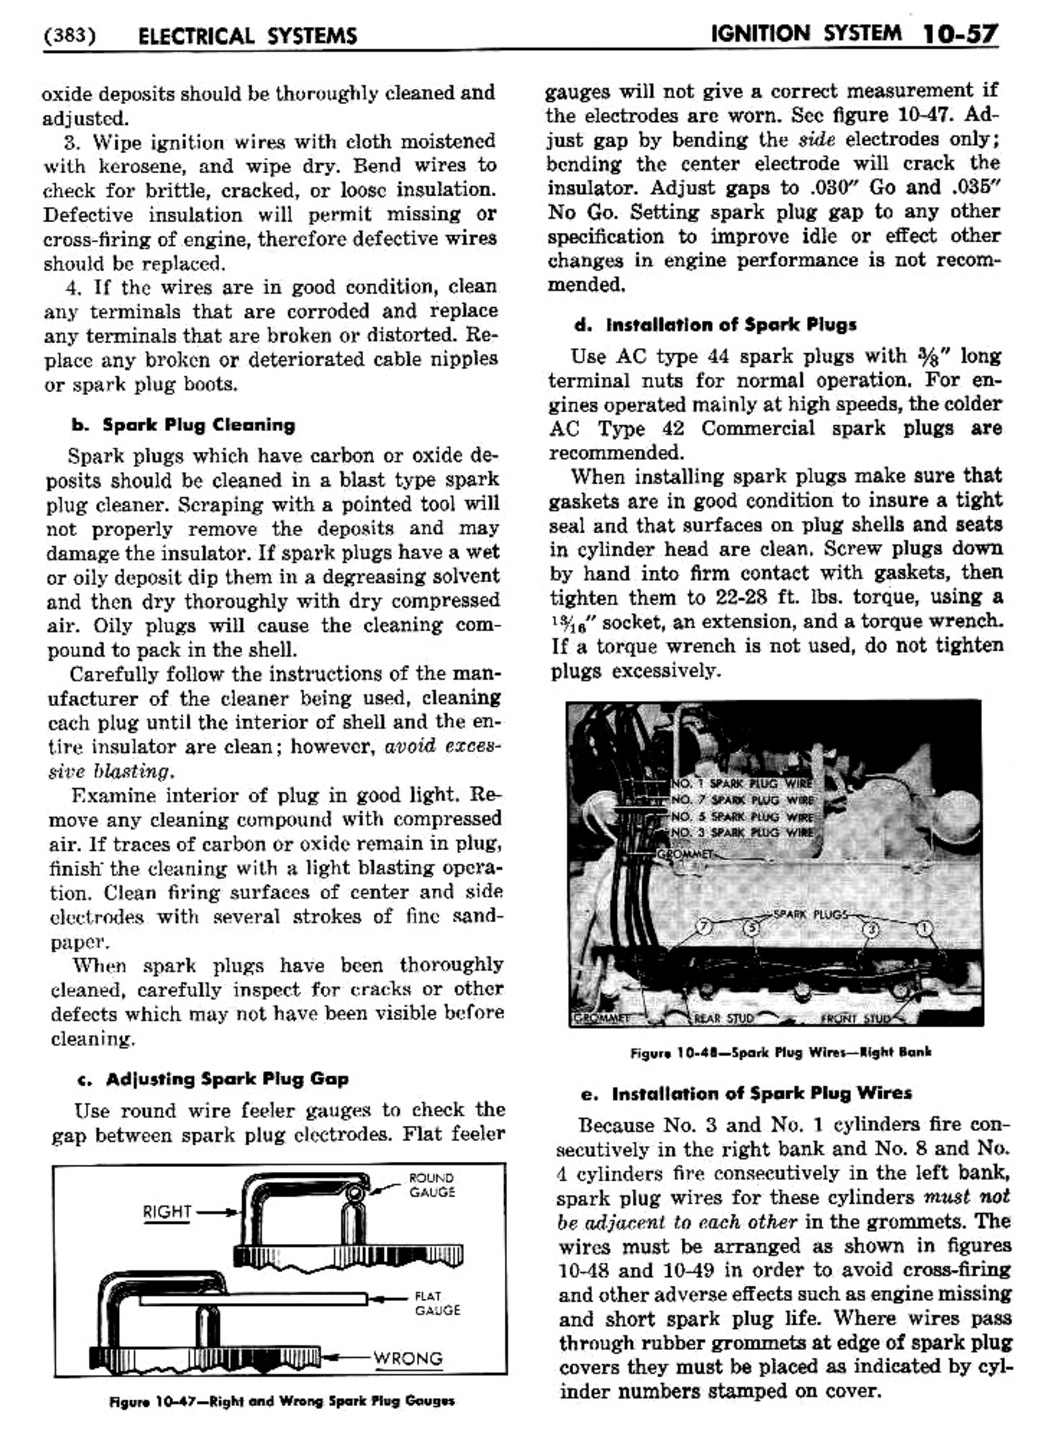 n_11 1956 Buick Shop Manual - Electrical Systems-057-057.jpg